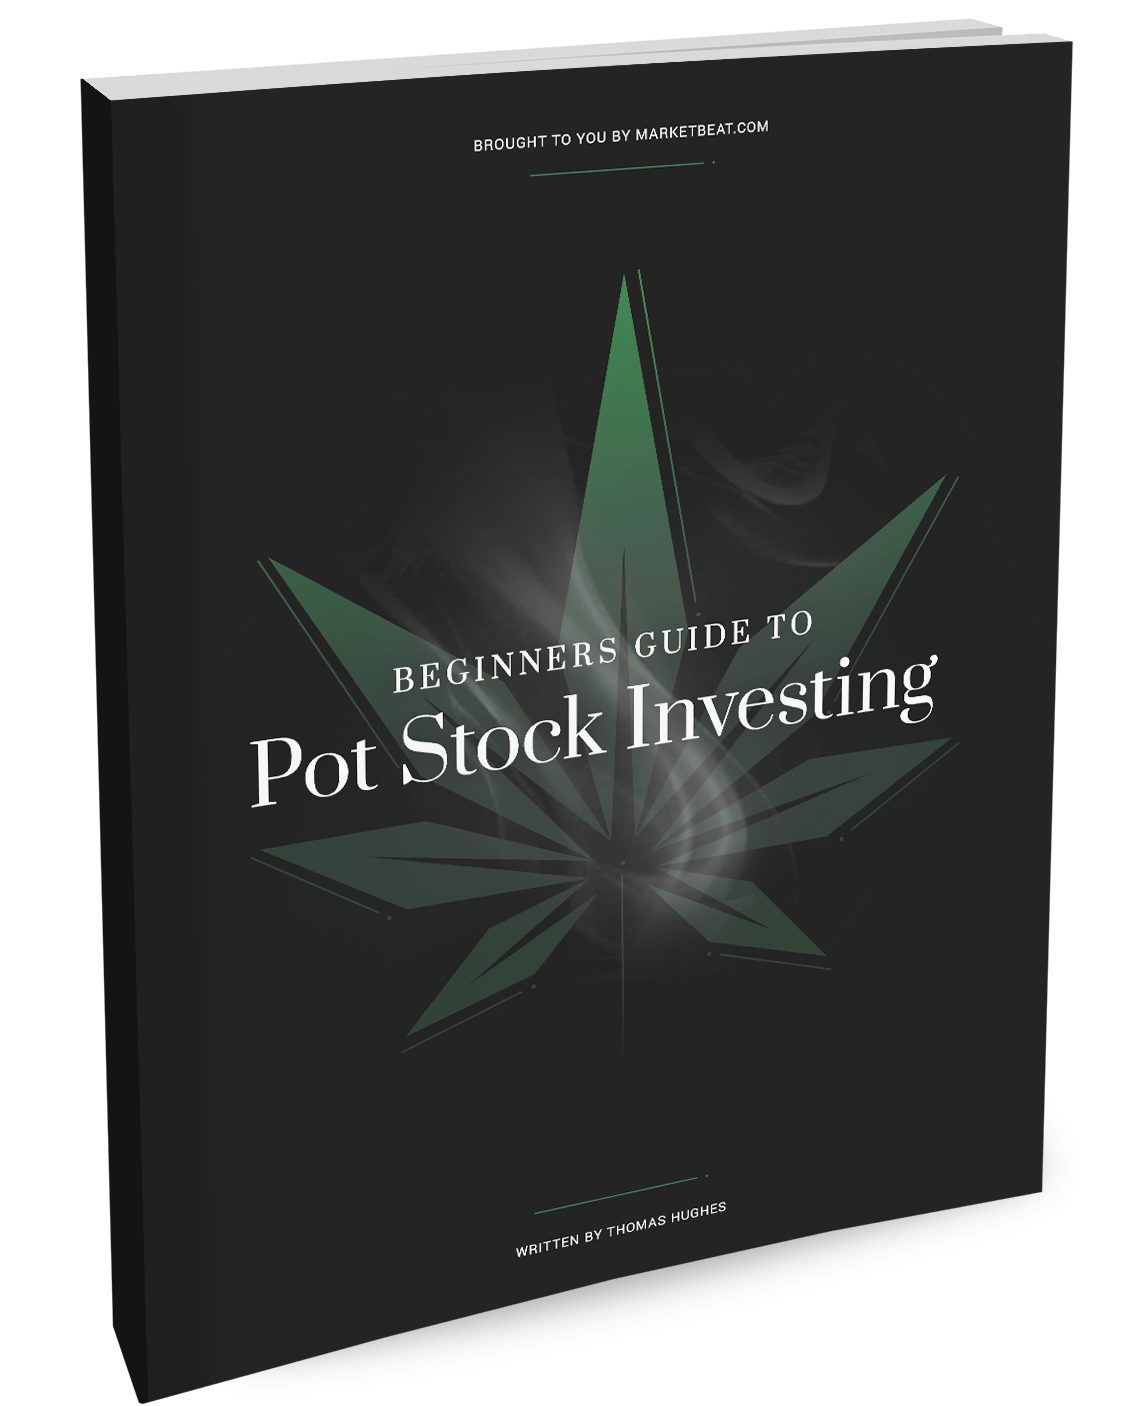 A beginner's guide to investing in pot stocks